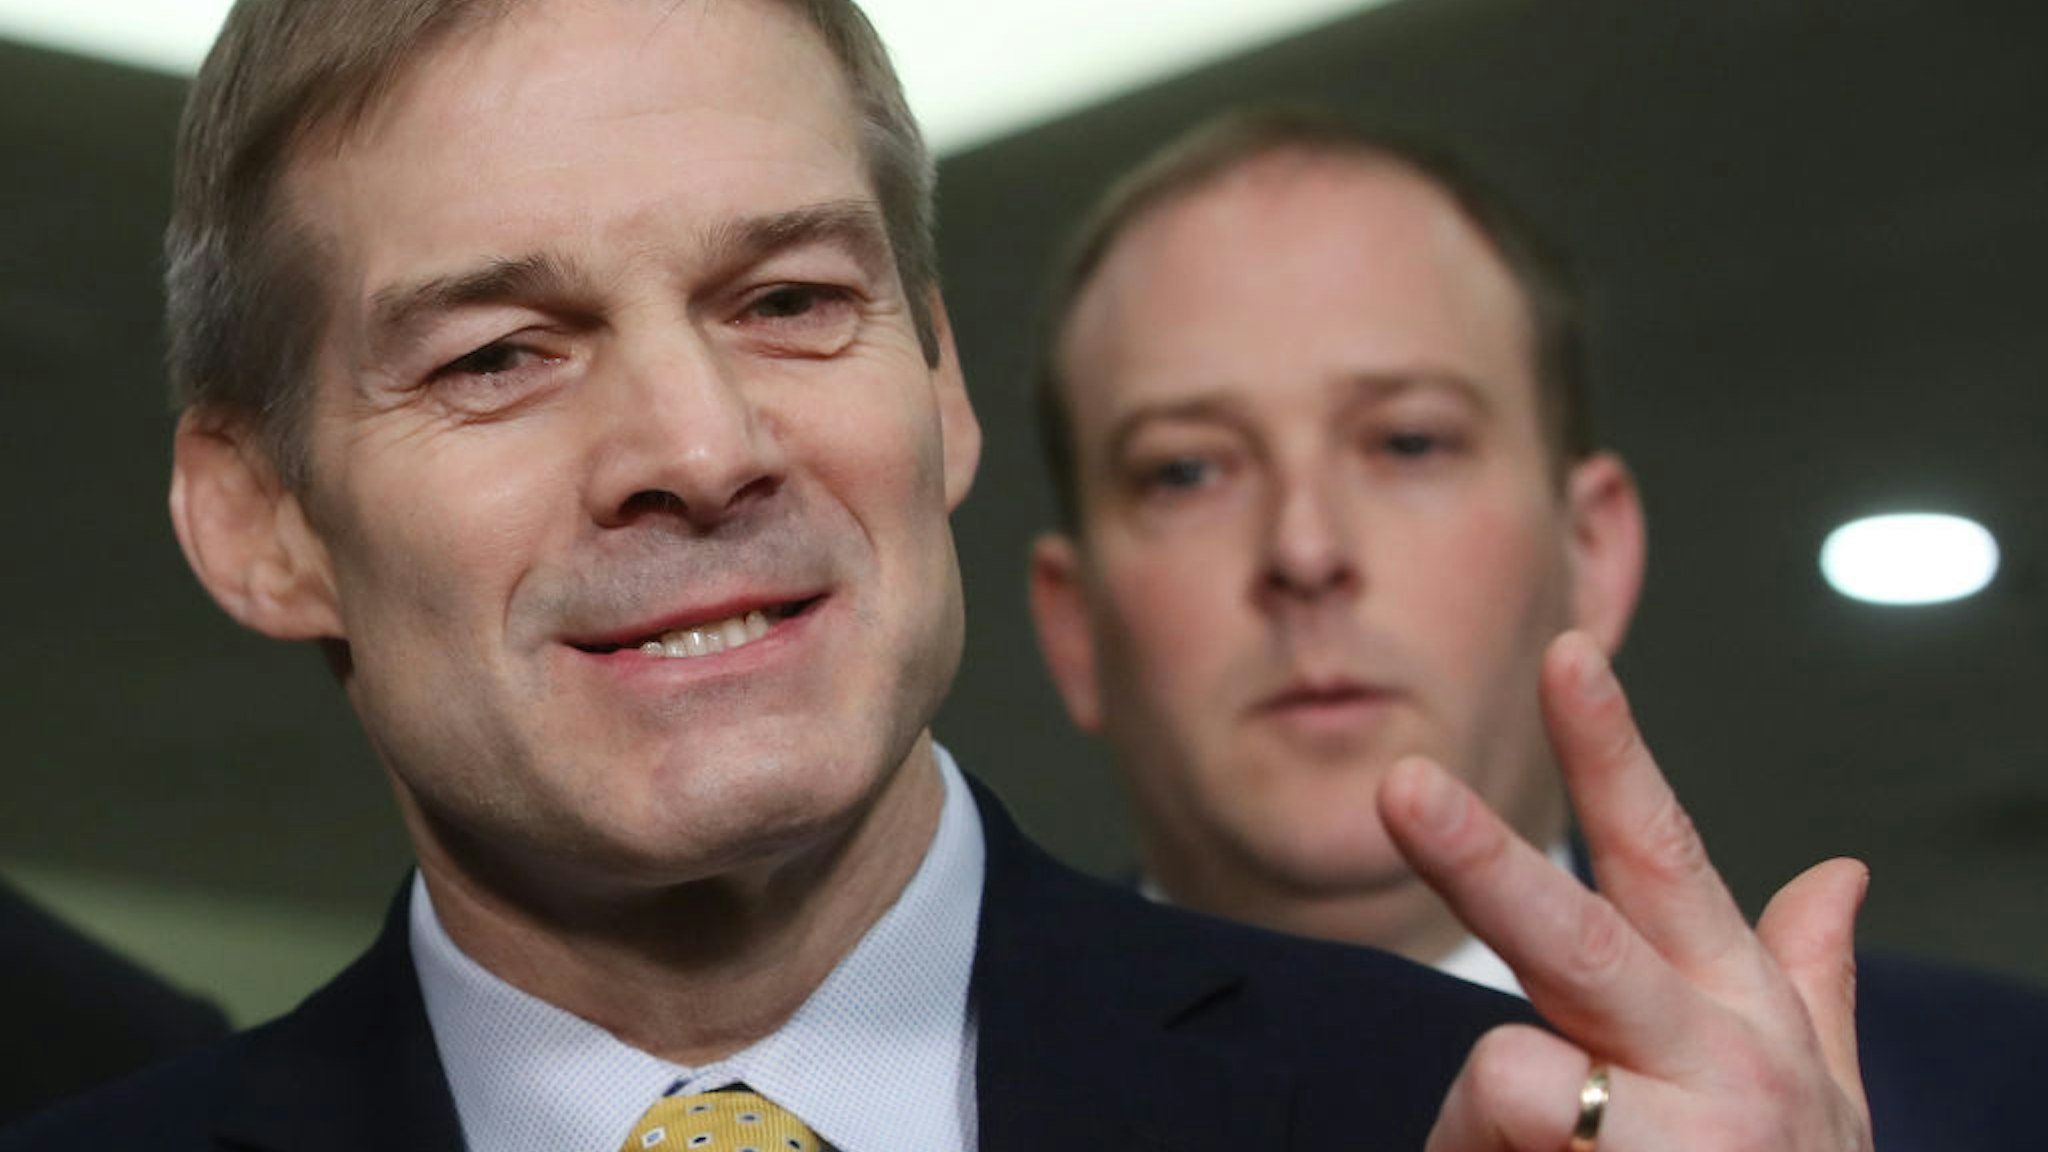 Rep. Jim Jordan (R-OH) (L), and Rep. Lee Zeldin (R-NY), speak with reporters in the Senate subway before the impeachment trial of President Donald Trump resumes at the U.S. Capitol on January 23, 2020 in Washington, DC.